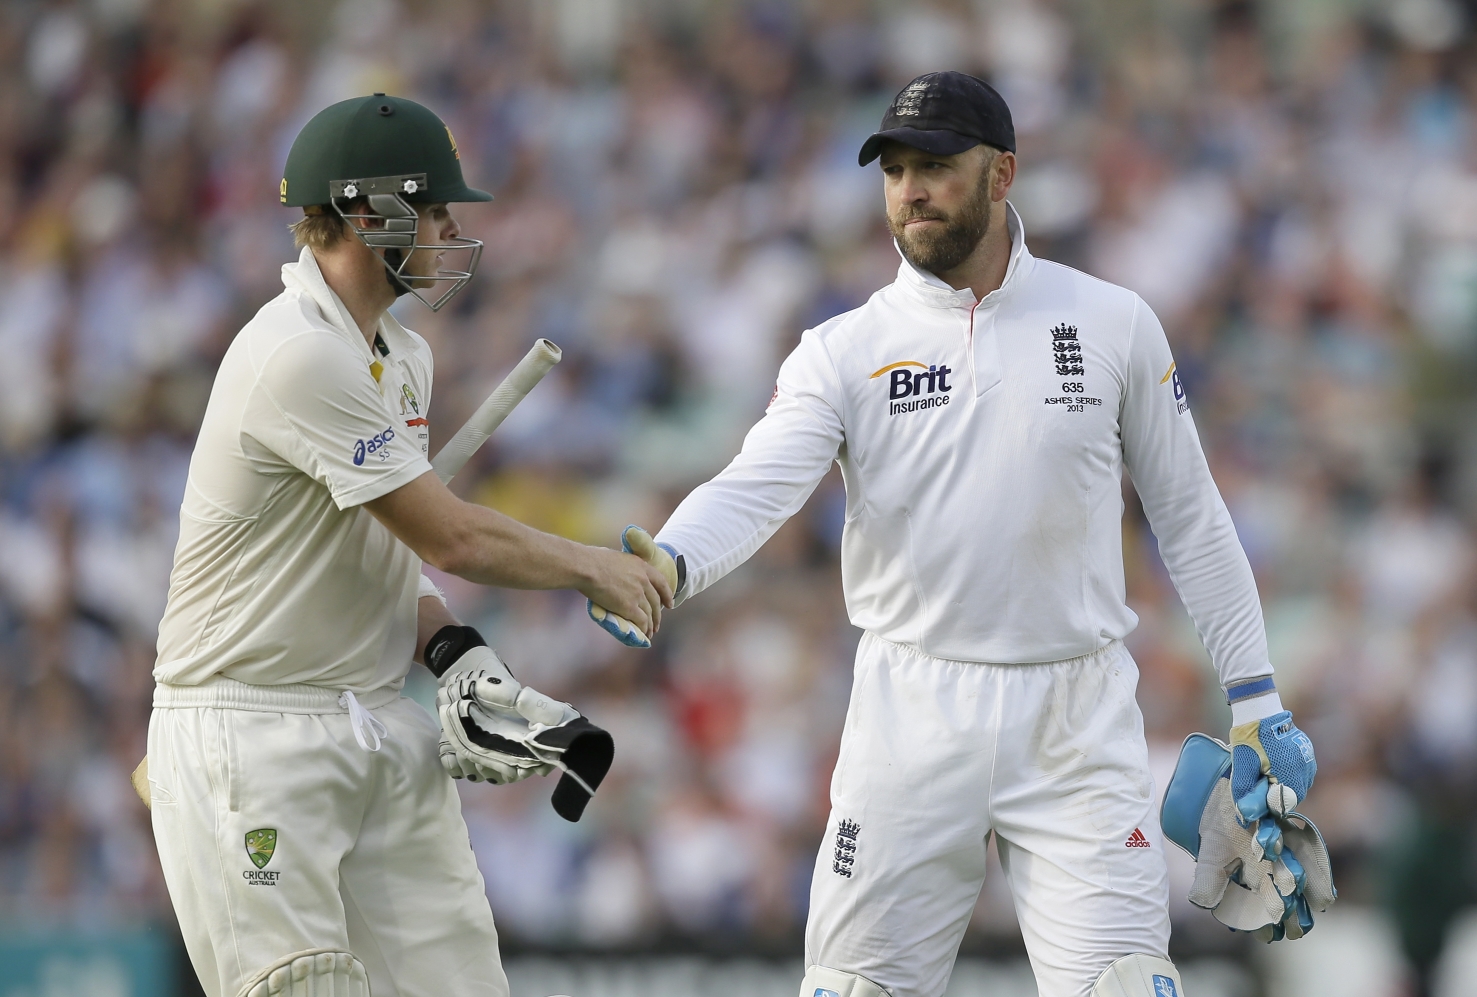 England's wicketkeeper Matt Prior, right, shakes hands with Australia's Steven Smith as Australia declare their first innings on 492 for 9, with Smith unbeaten on 138, during play on the second day of the fifth Ashes cricket Test at the Oval cricket ground in London. Photo: AP